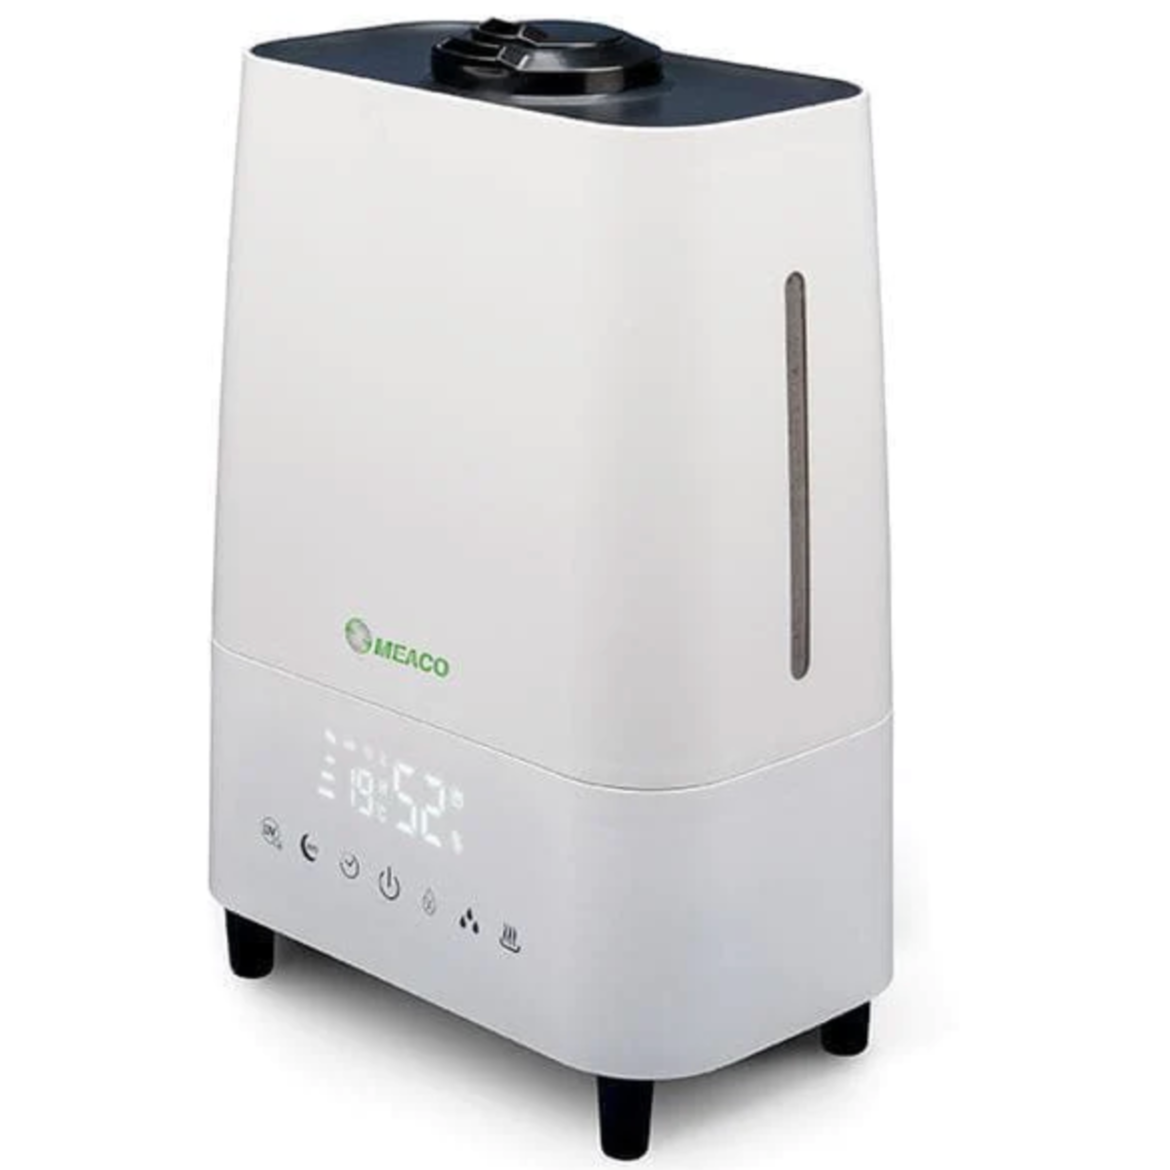 Meaco Deluxe 202 Ultrasonic Humidifier and Air Purifier